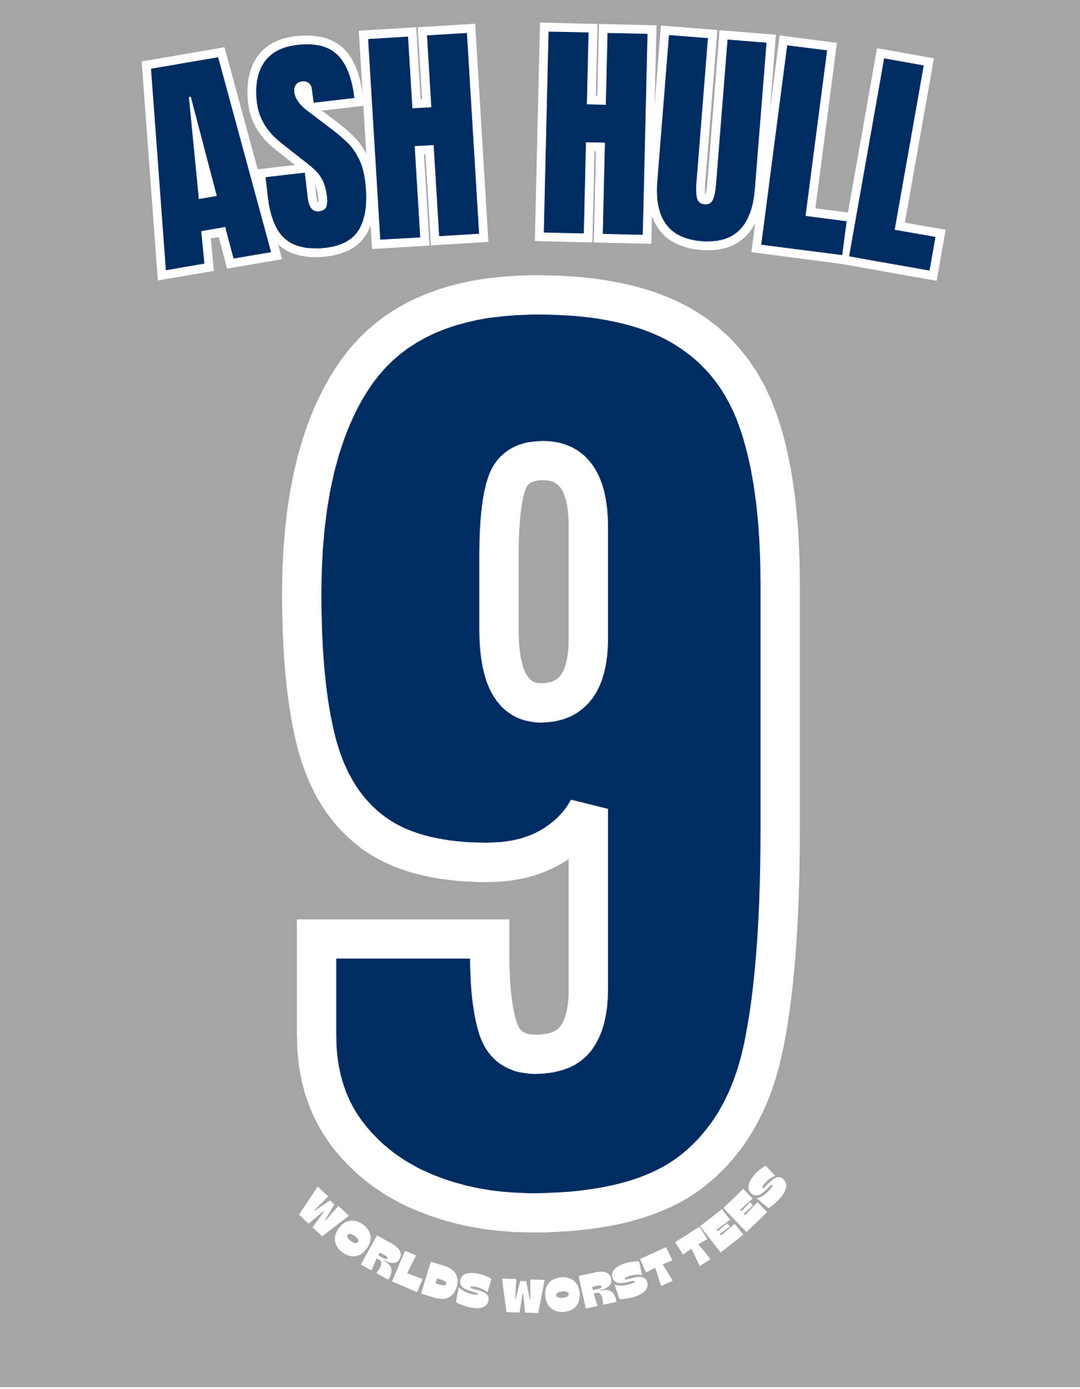 Relaxed fit Houston Asshats #9 Ash Hull Tee, 100% ring-spun cotton, medium weight, durable double-needle stitching, tubular shape, no side-seams. Graphic design with blue and white elements.